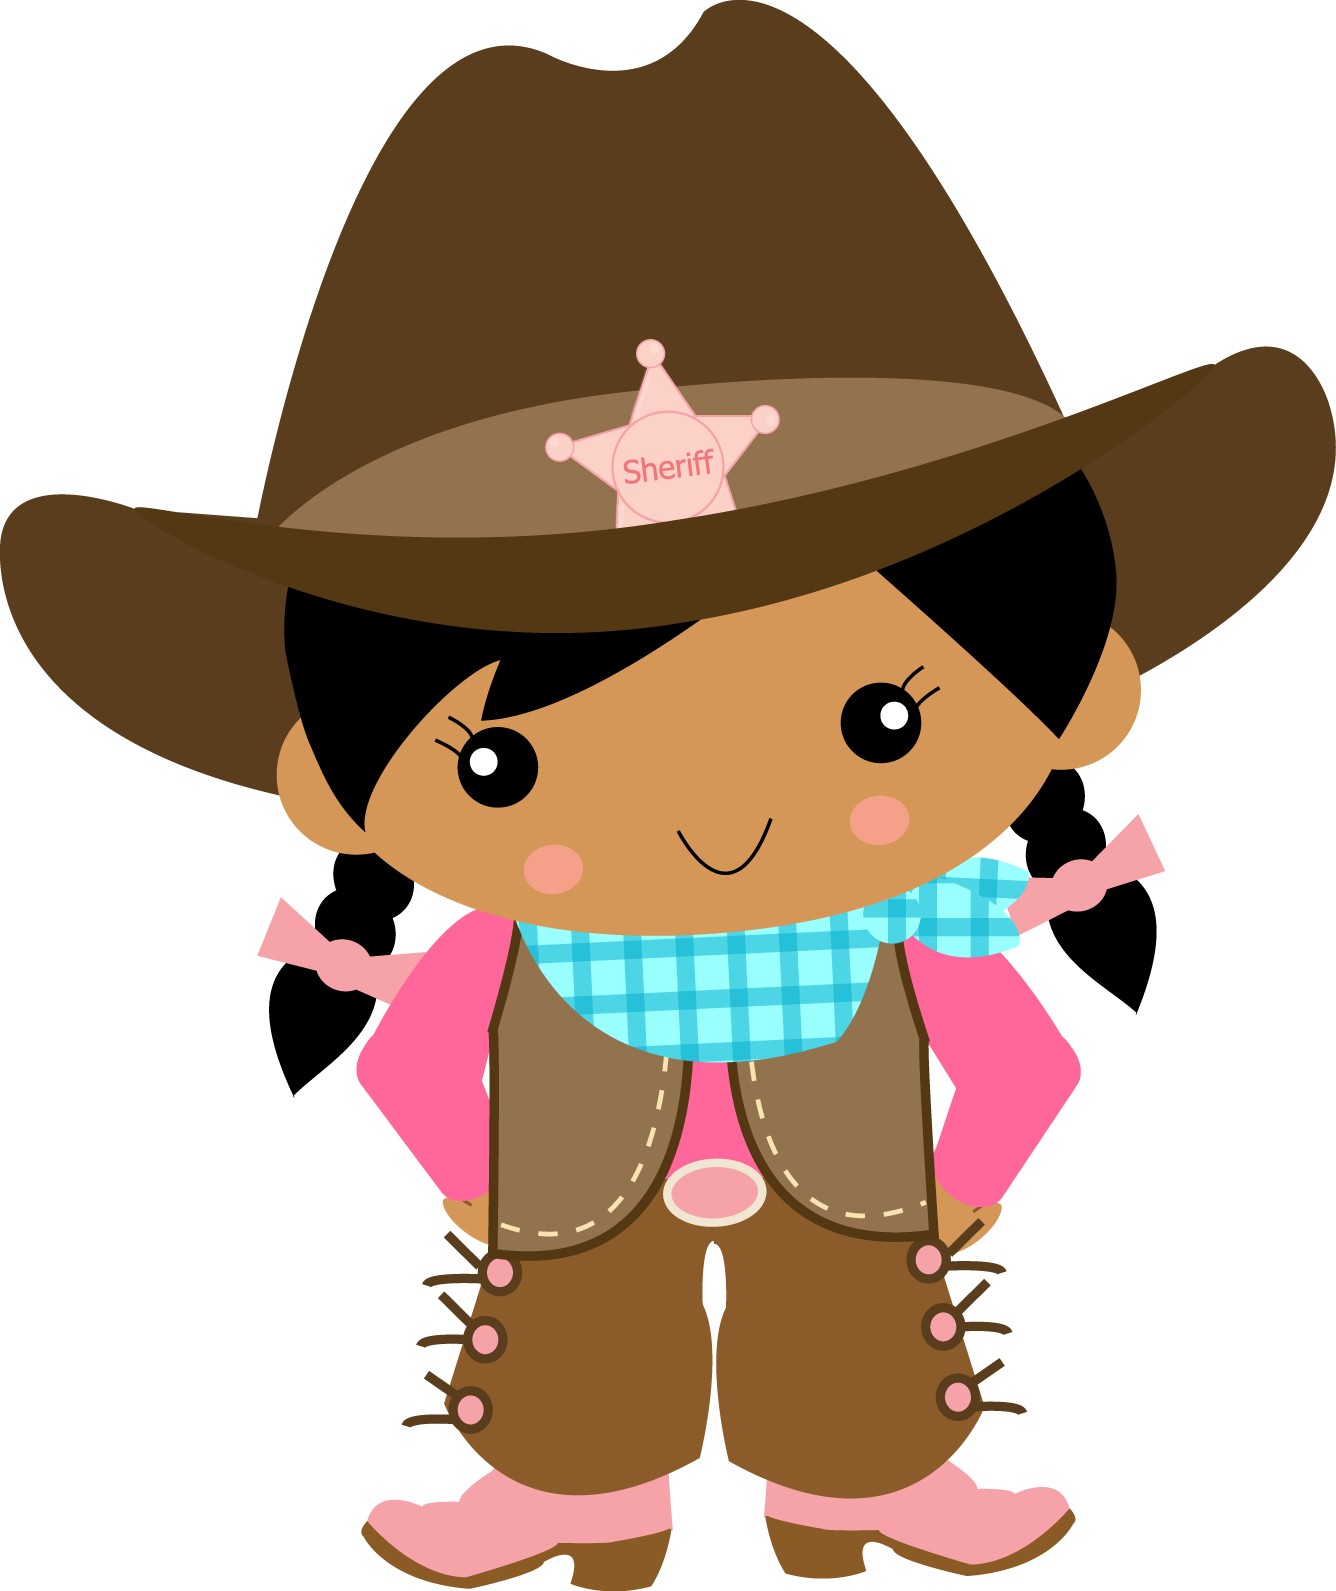 cowgirl 21